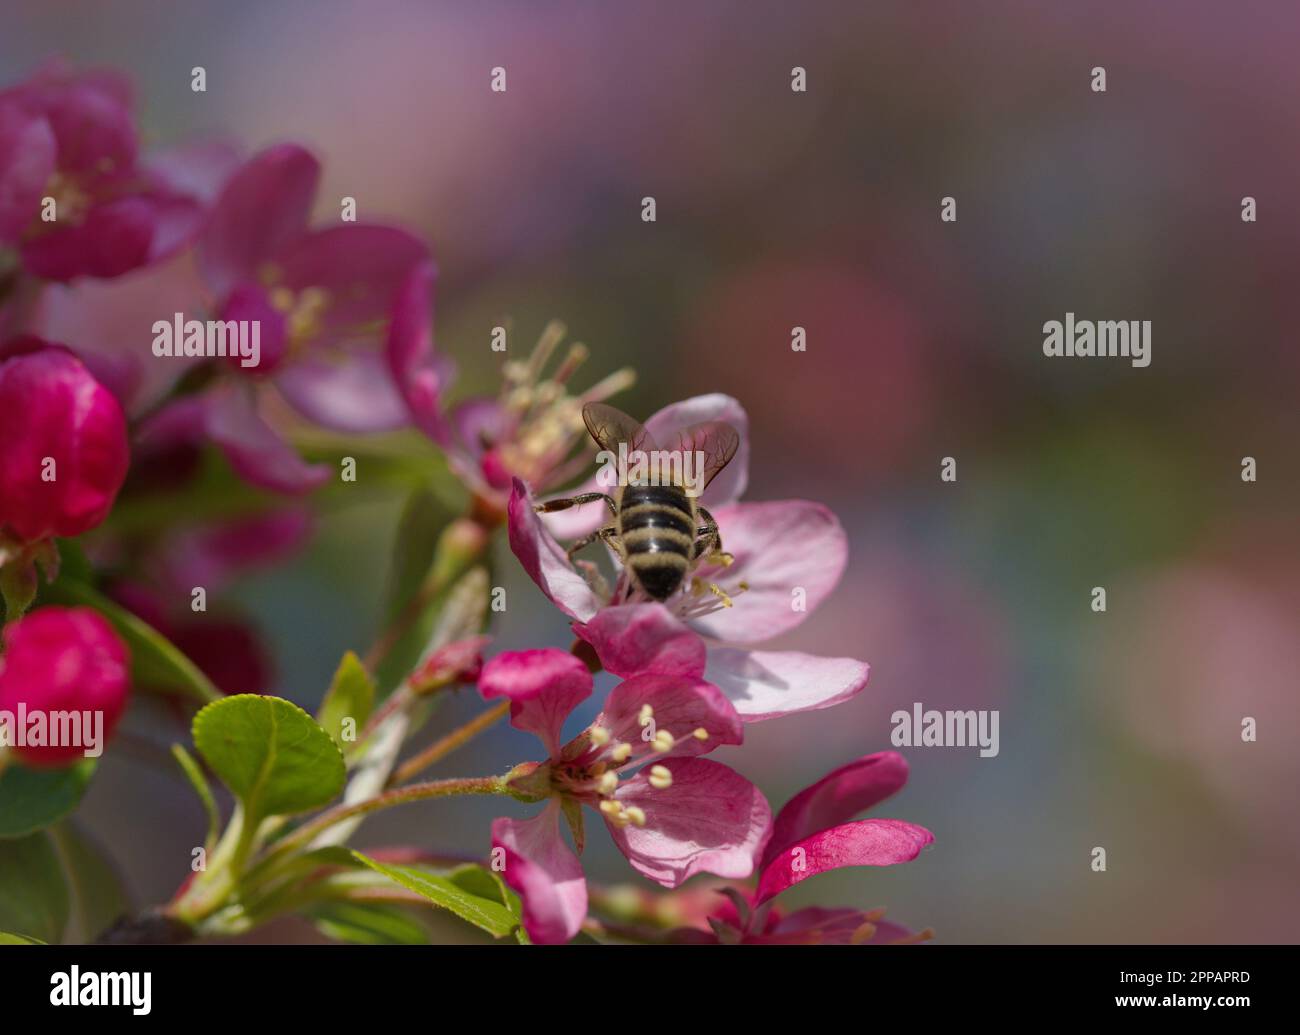 Macro photography of a honey bee on a flower in spring Stock Photo